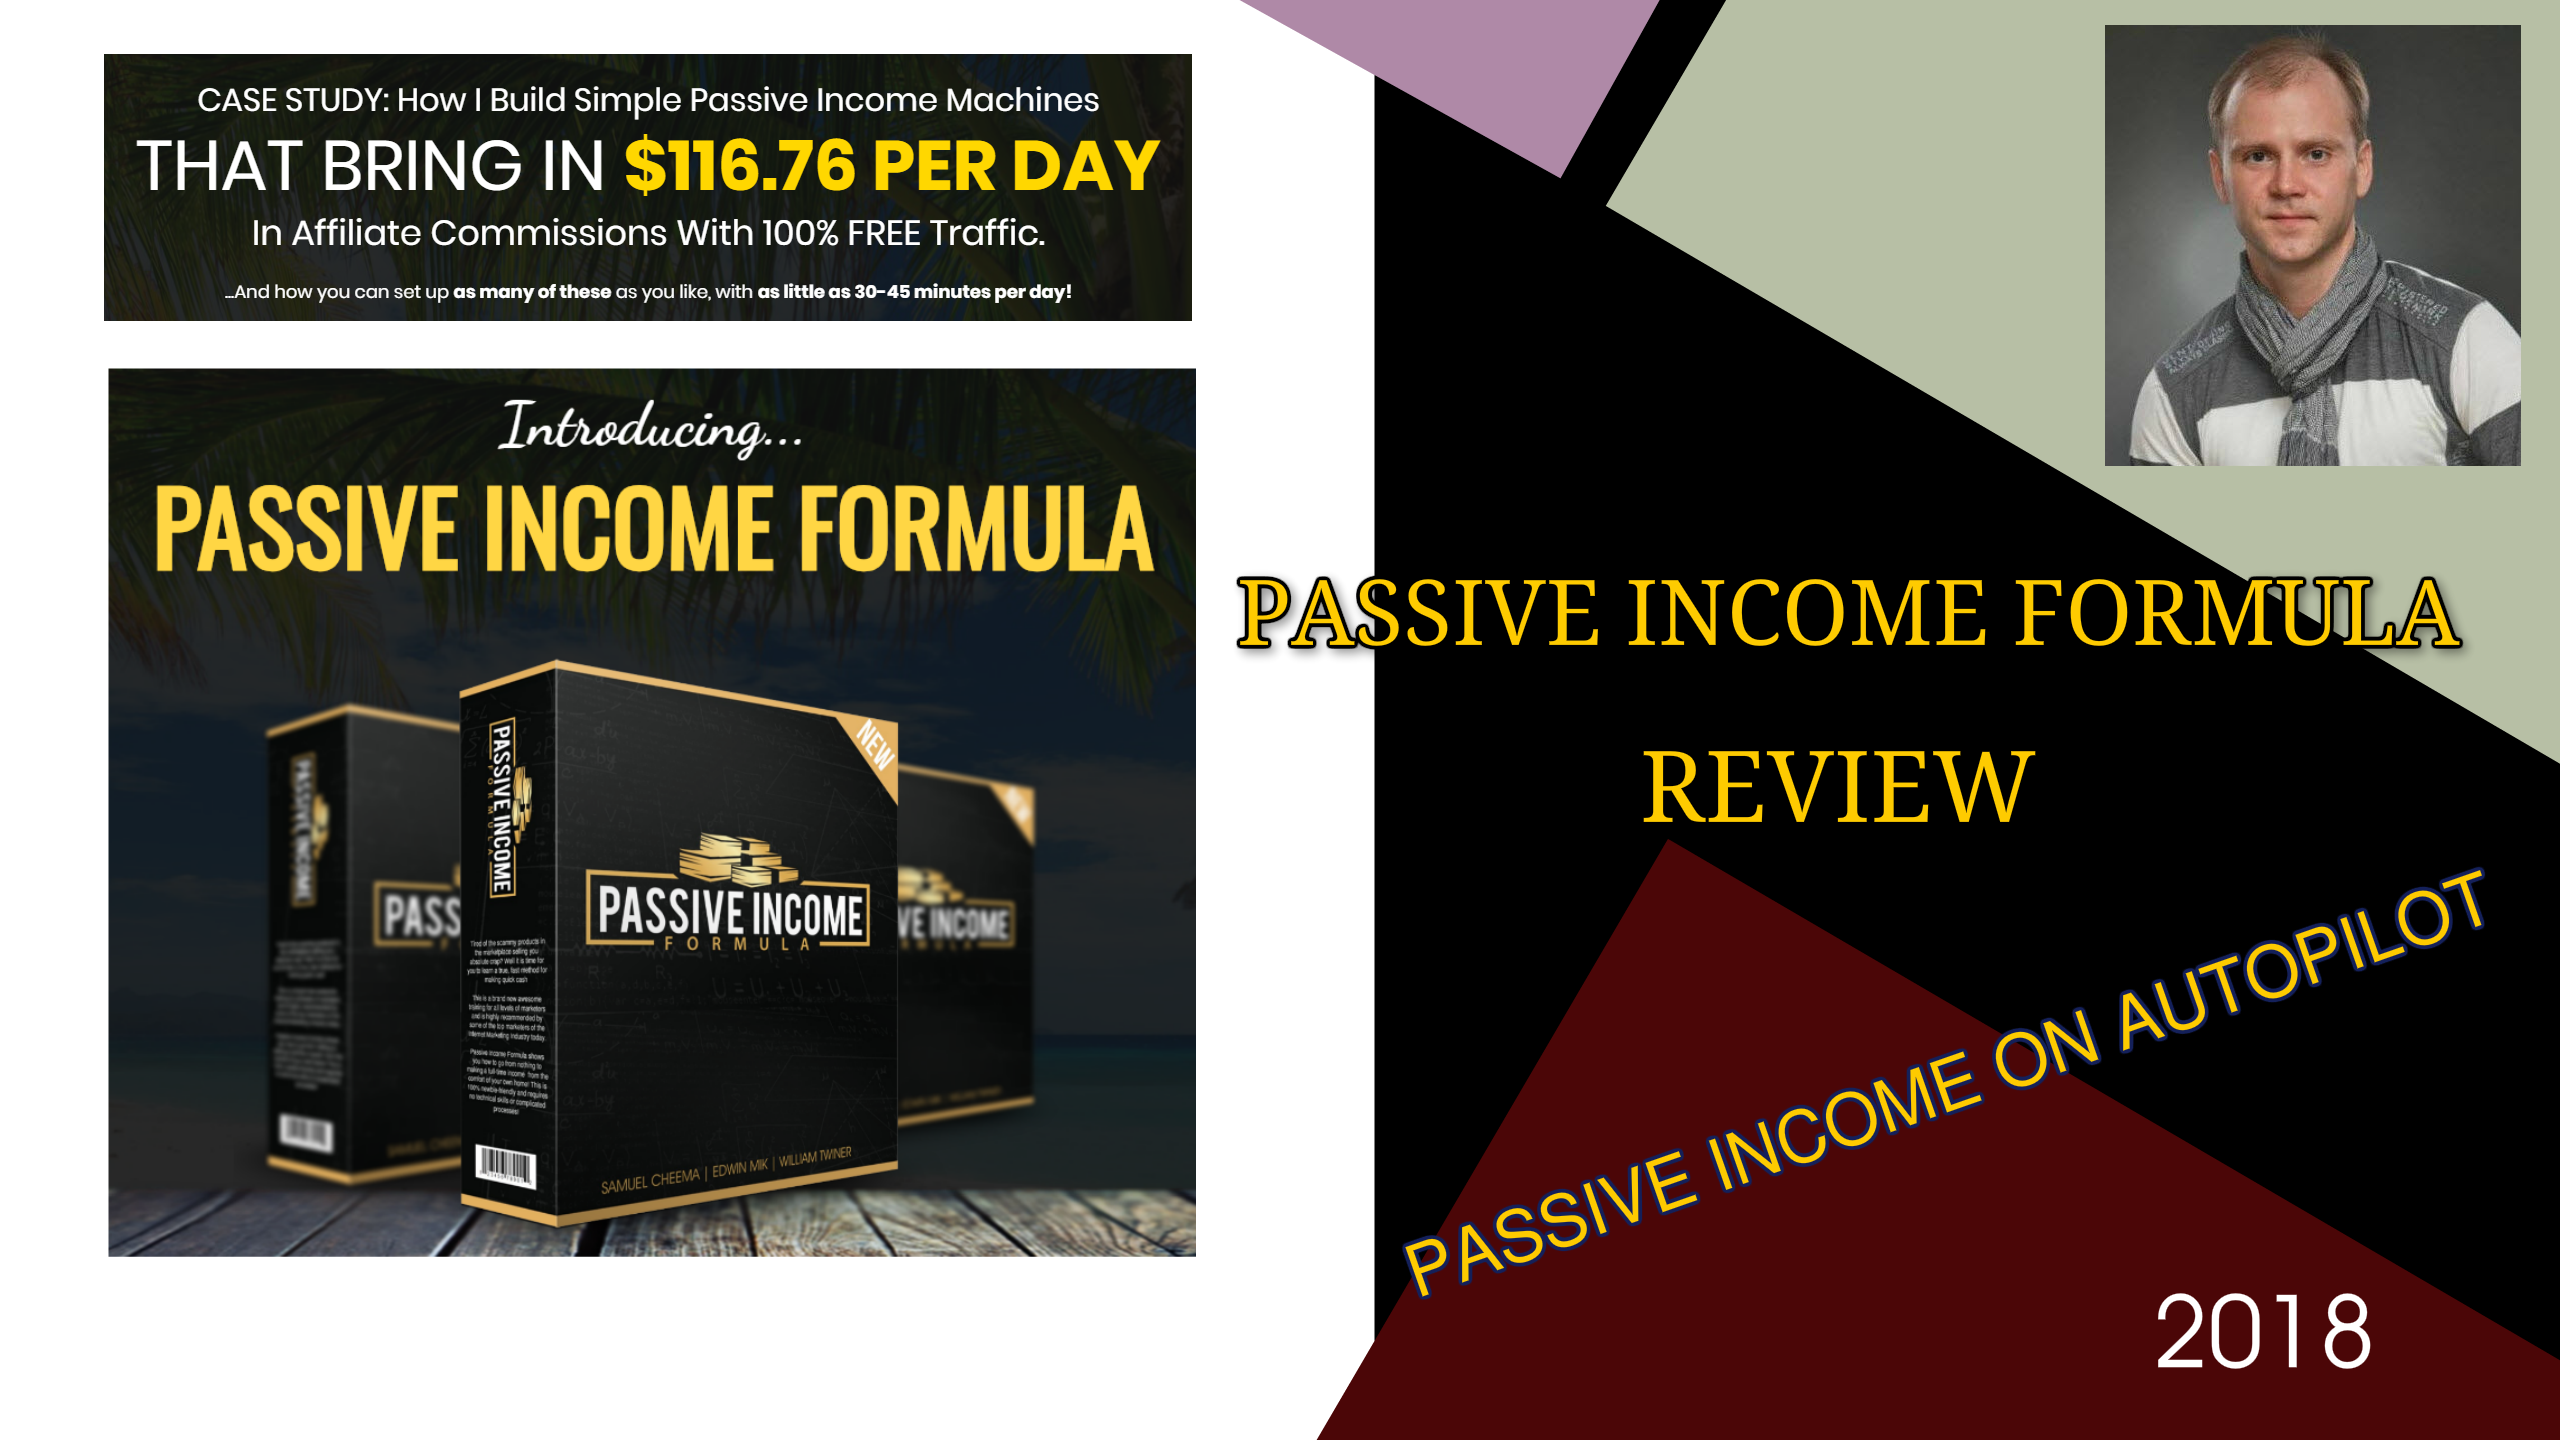 PASSIVE INCOME FORMULA REVIEW BY GENA BABAK